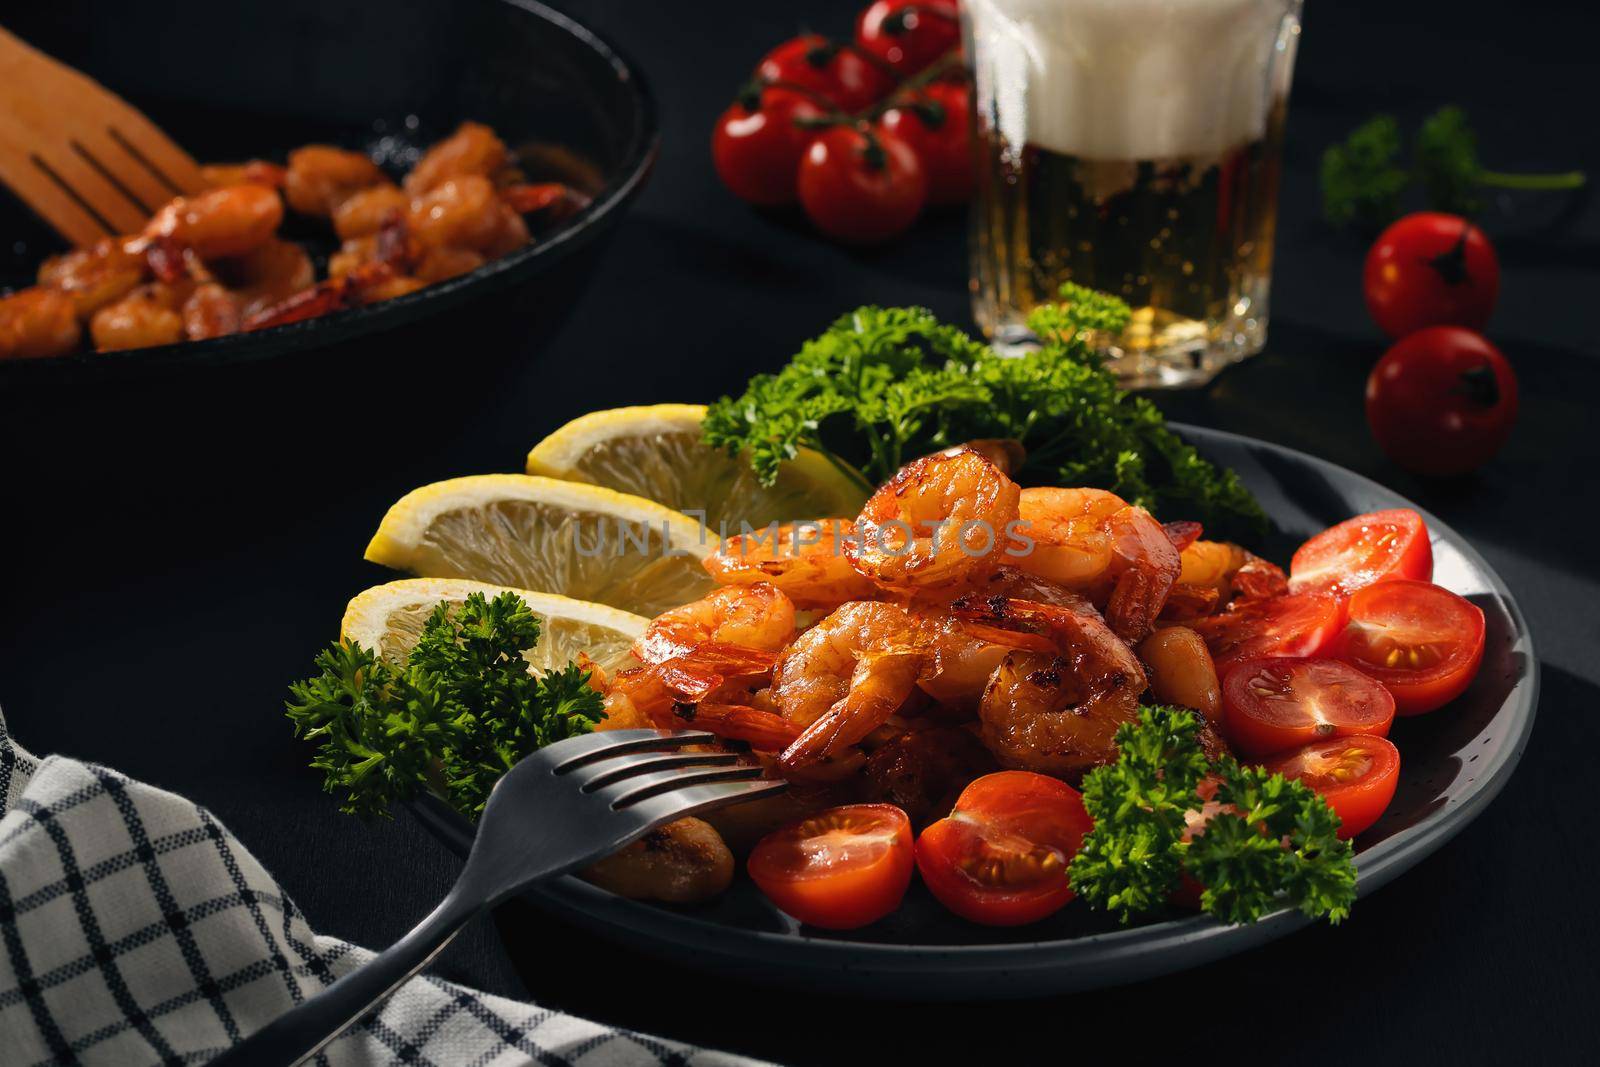 Served dinner - fried shrimp with lemon, tomatoes and herbs and beer in a glass on the table.